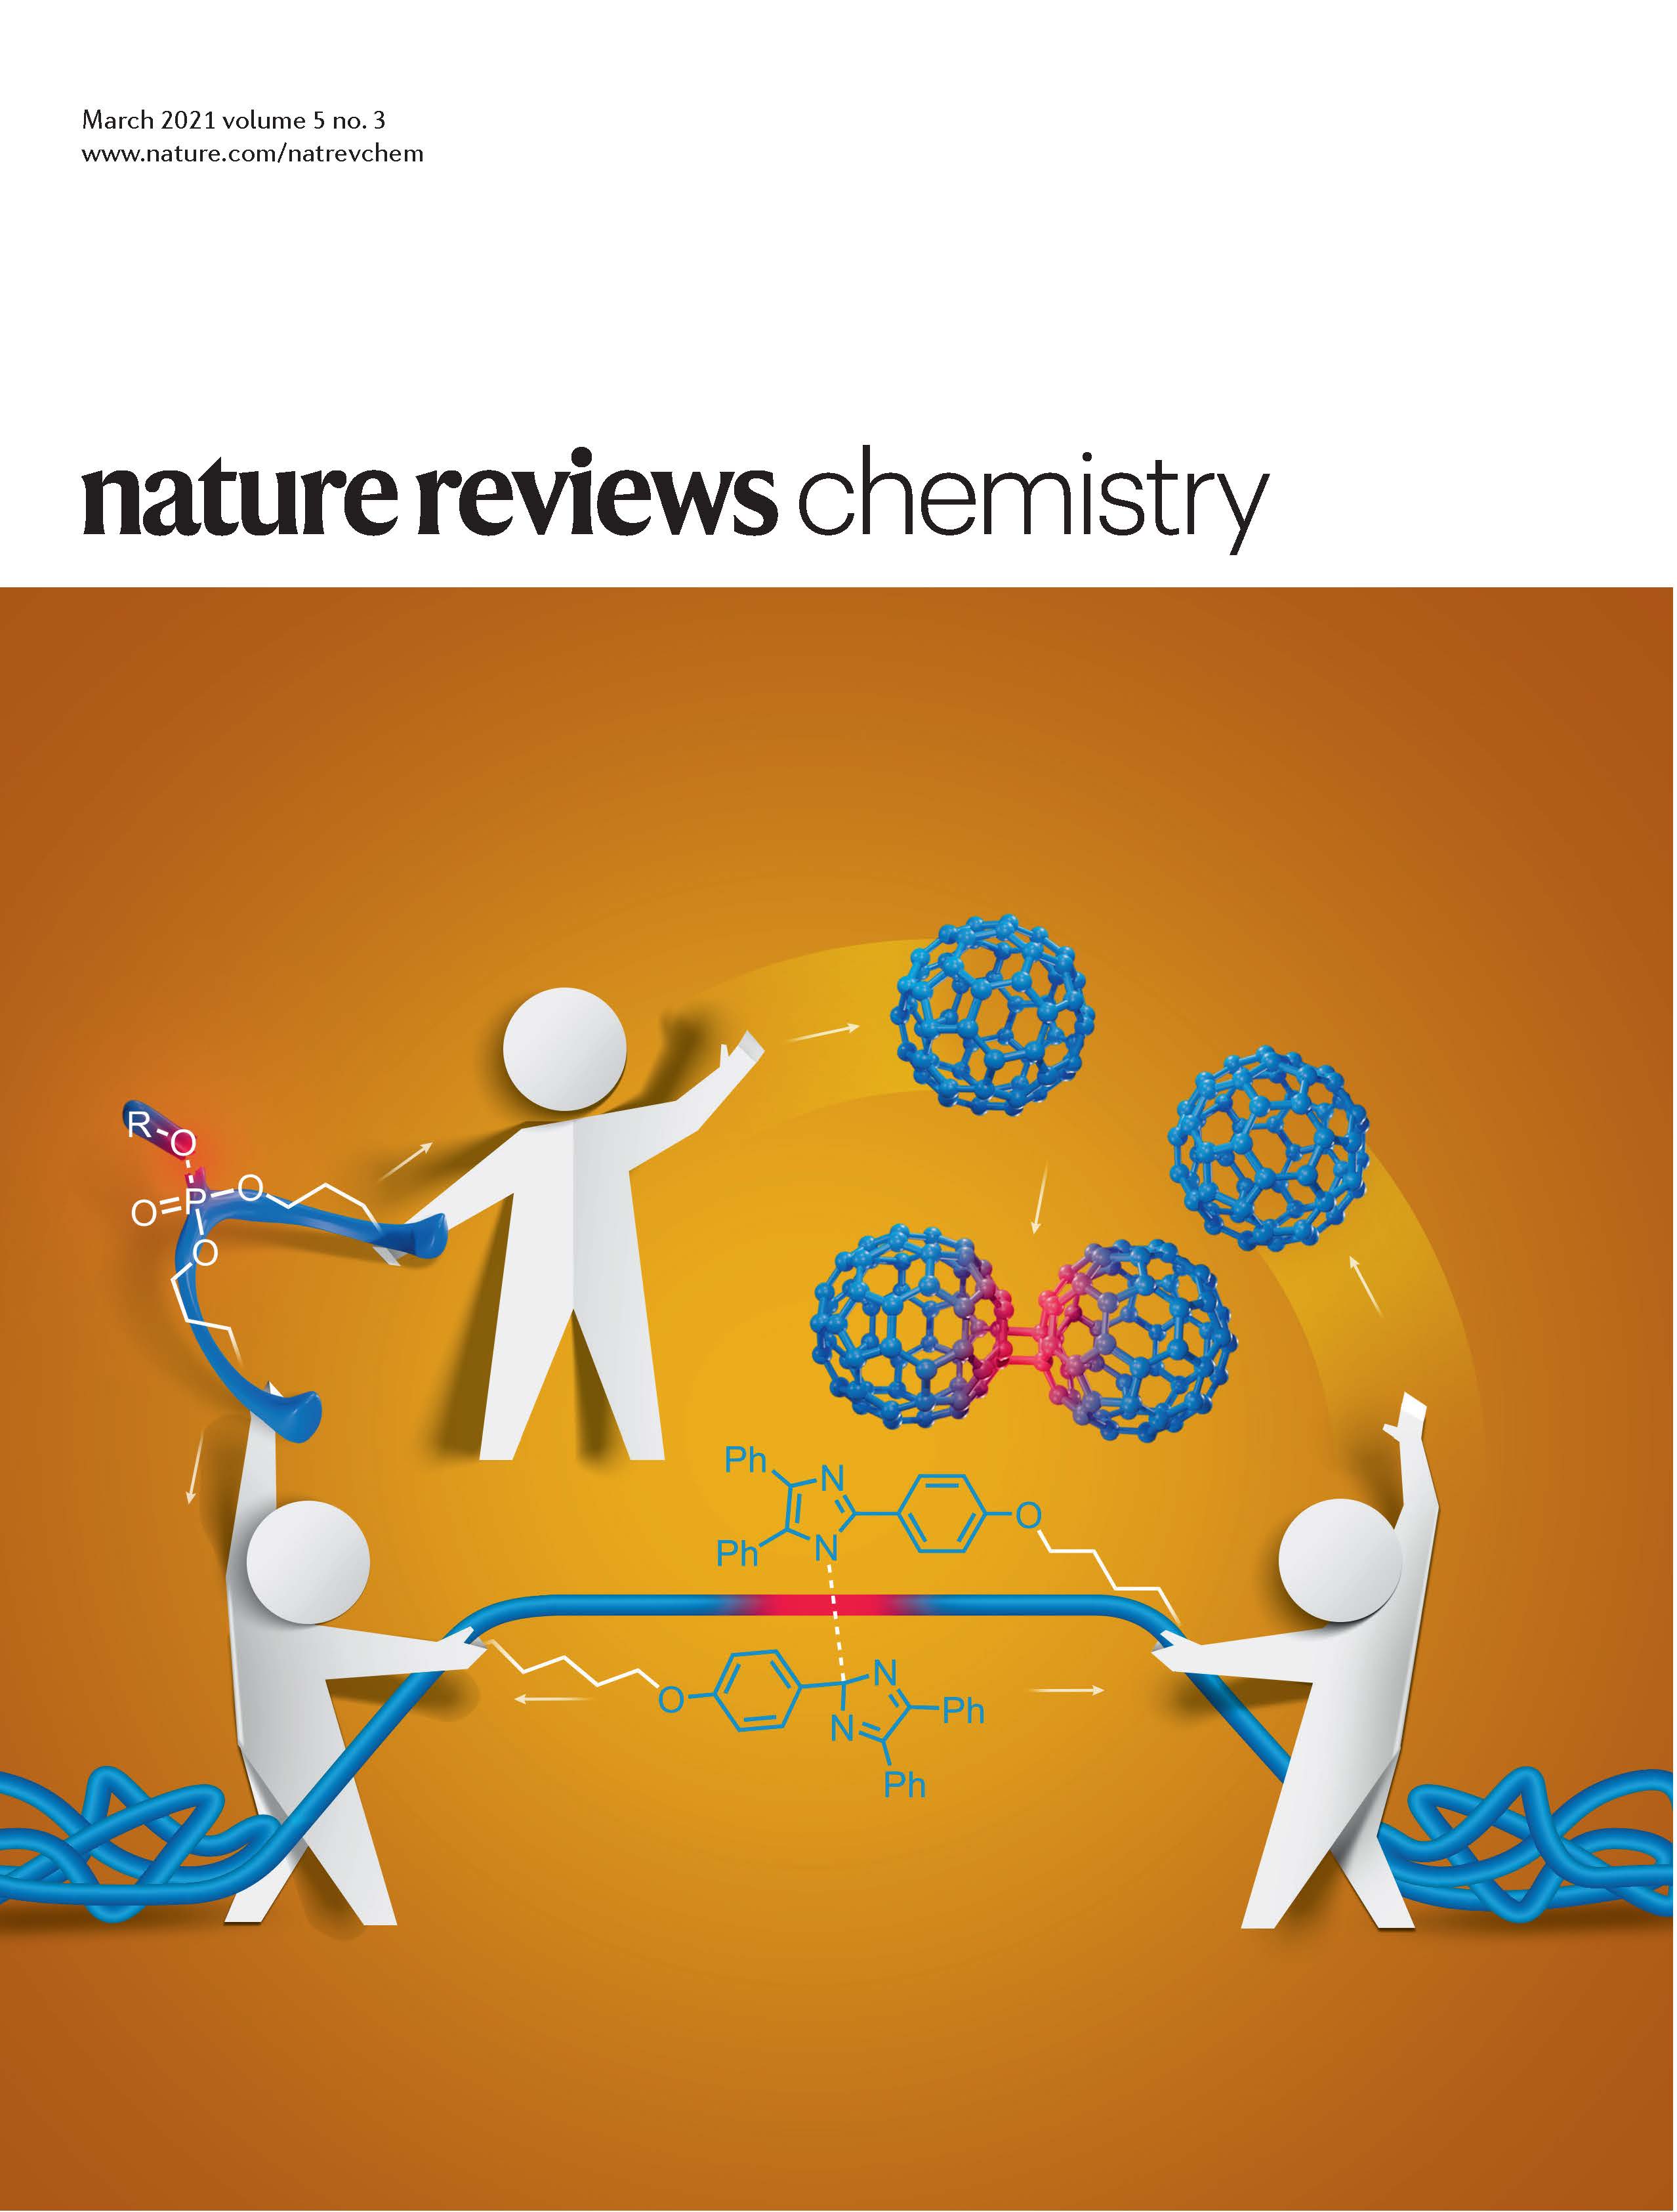 Nature Rev. Chem. March 2021 cover